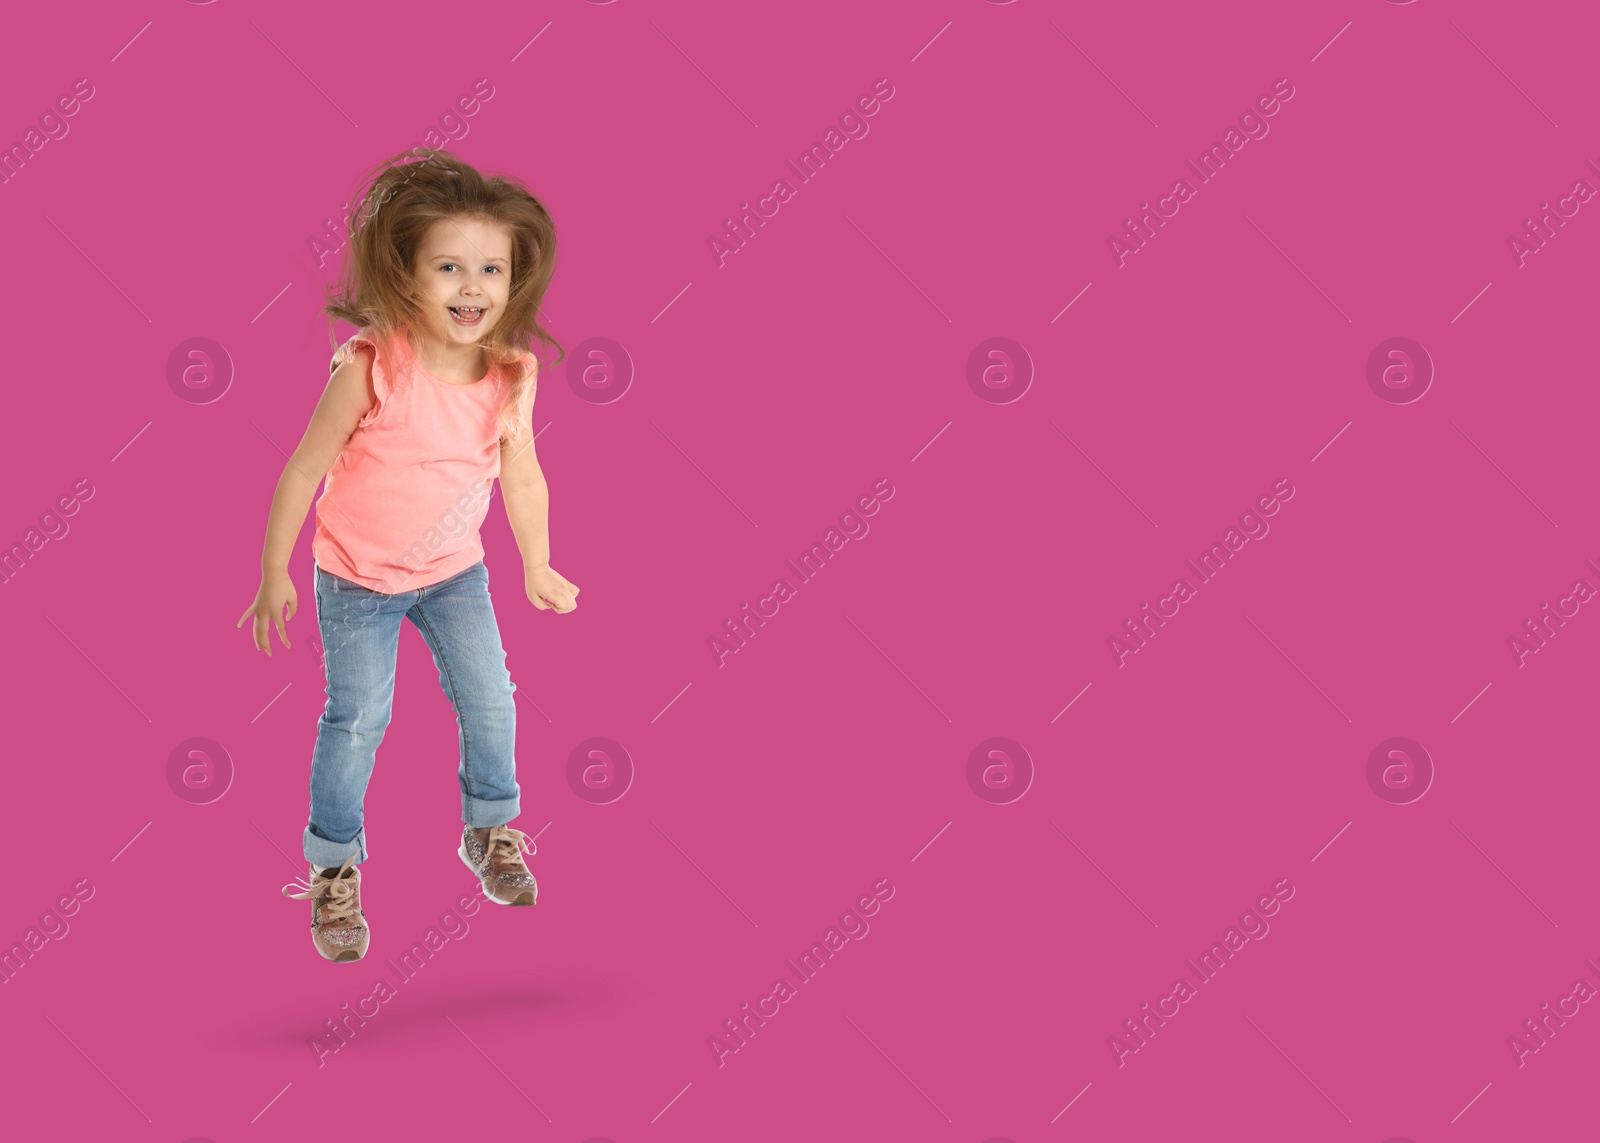 Image of Cute girl jumping on dark pink background, space for text